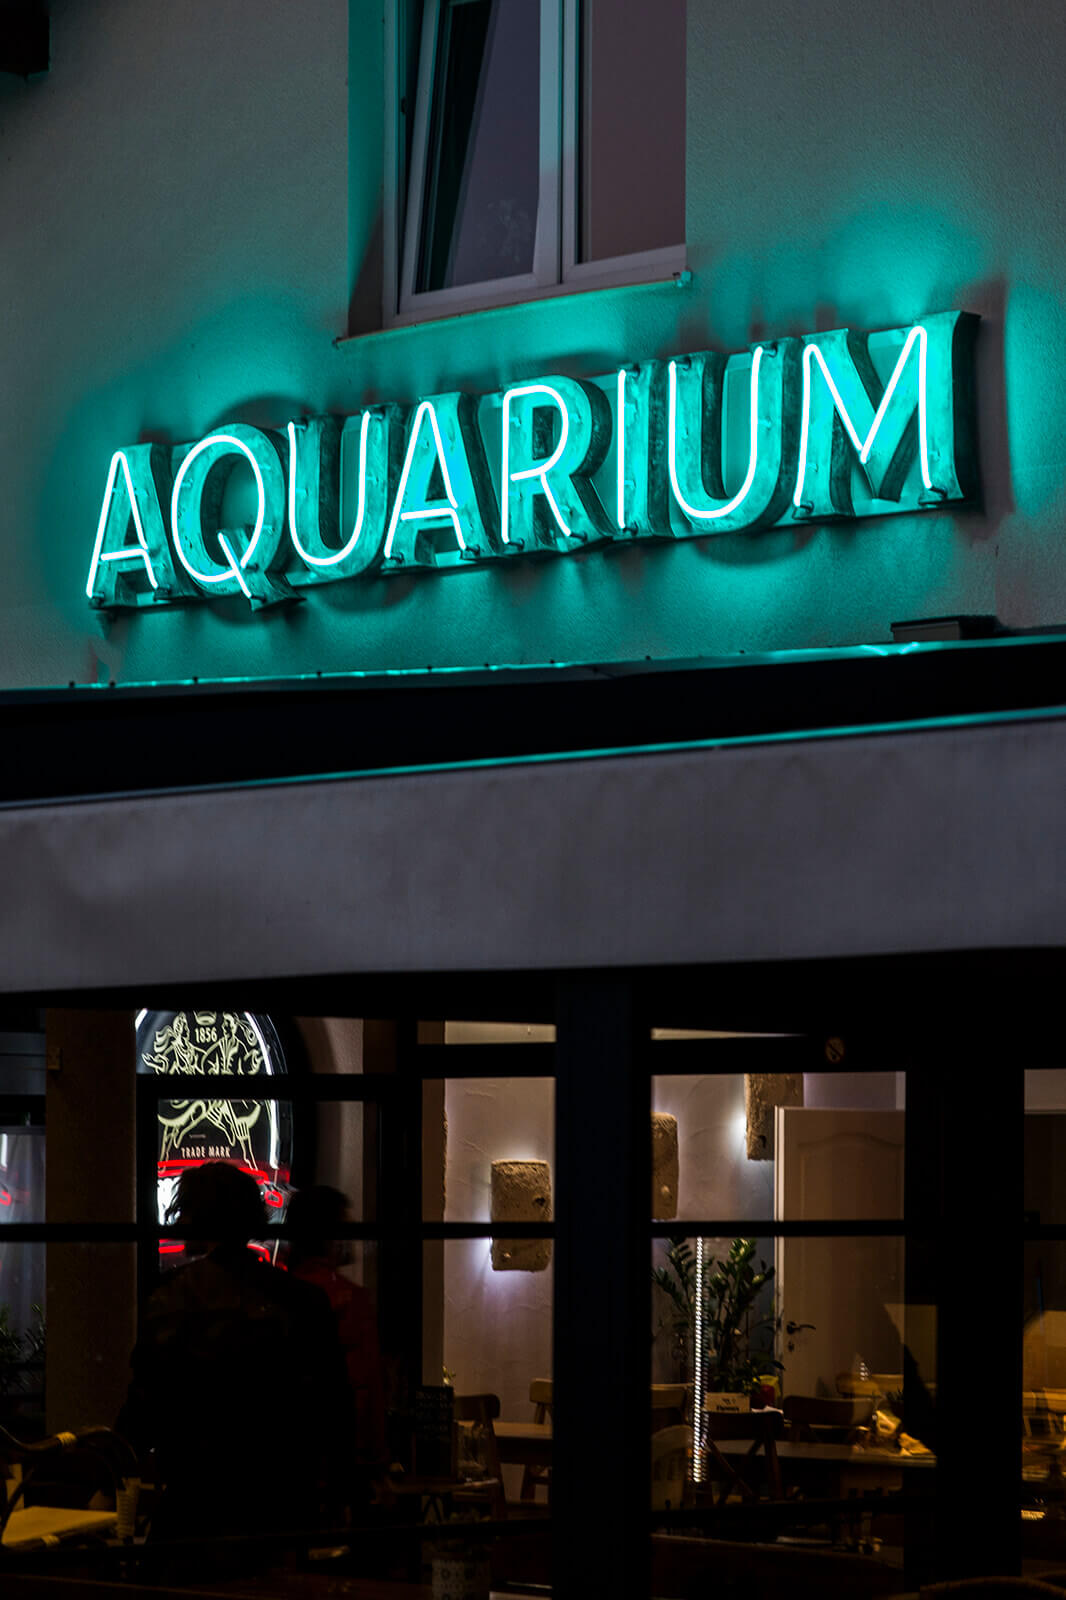 aquarium aquarium - aquarium-neon-on-the-wall-of-the-building-literature-covered-patina-neon-over-the-entry-to-restaurant-green-neon-on-the-elevation-of-the-building-neon-on-the-stage-under-glass (31).jpg